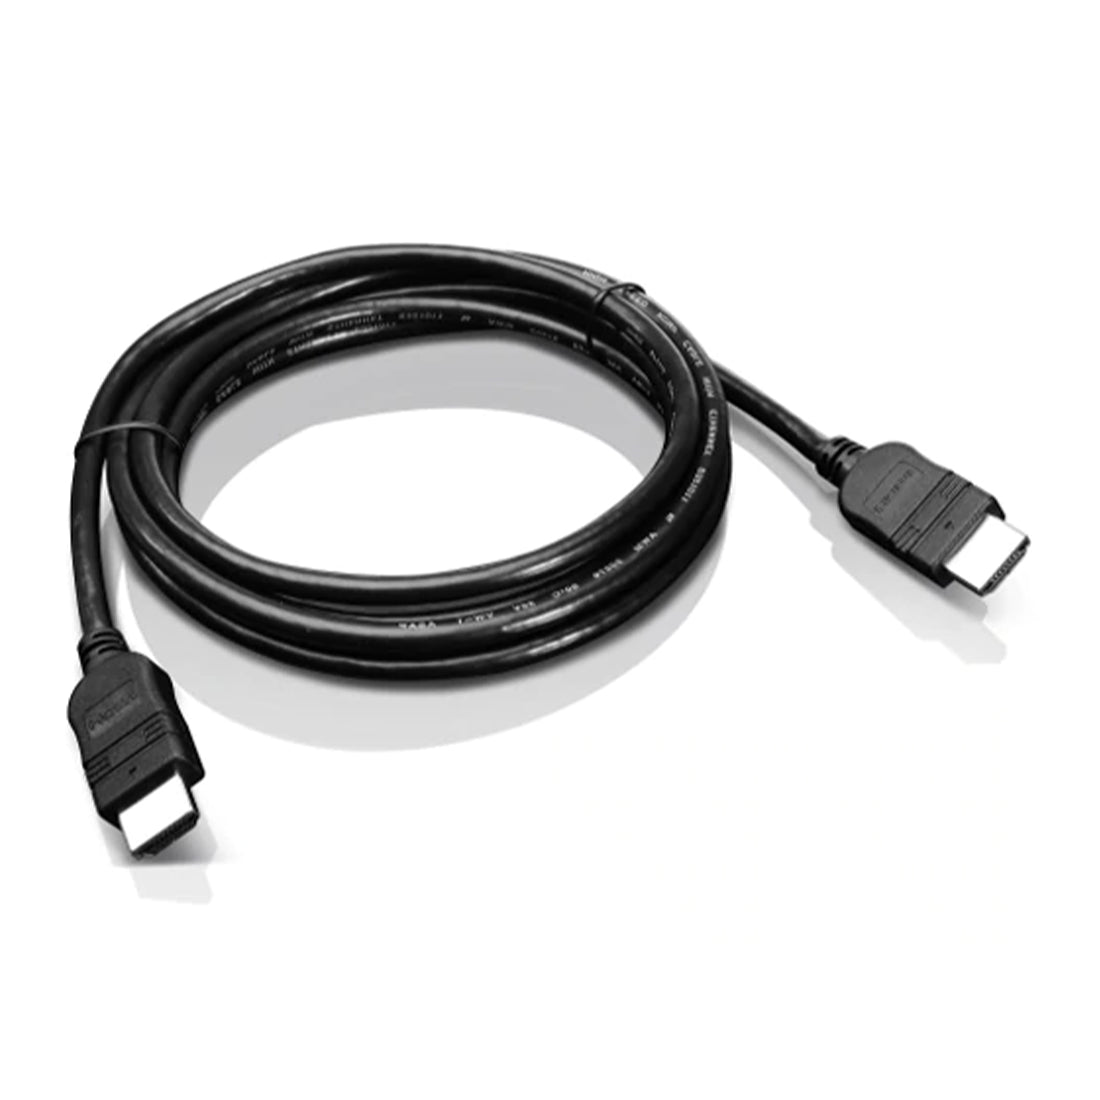 Lenovo HDMI to HDMI Cable with 1080p Resolution at 120Hz